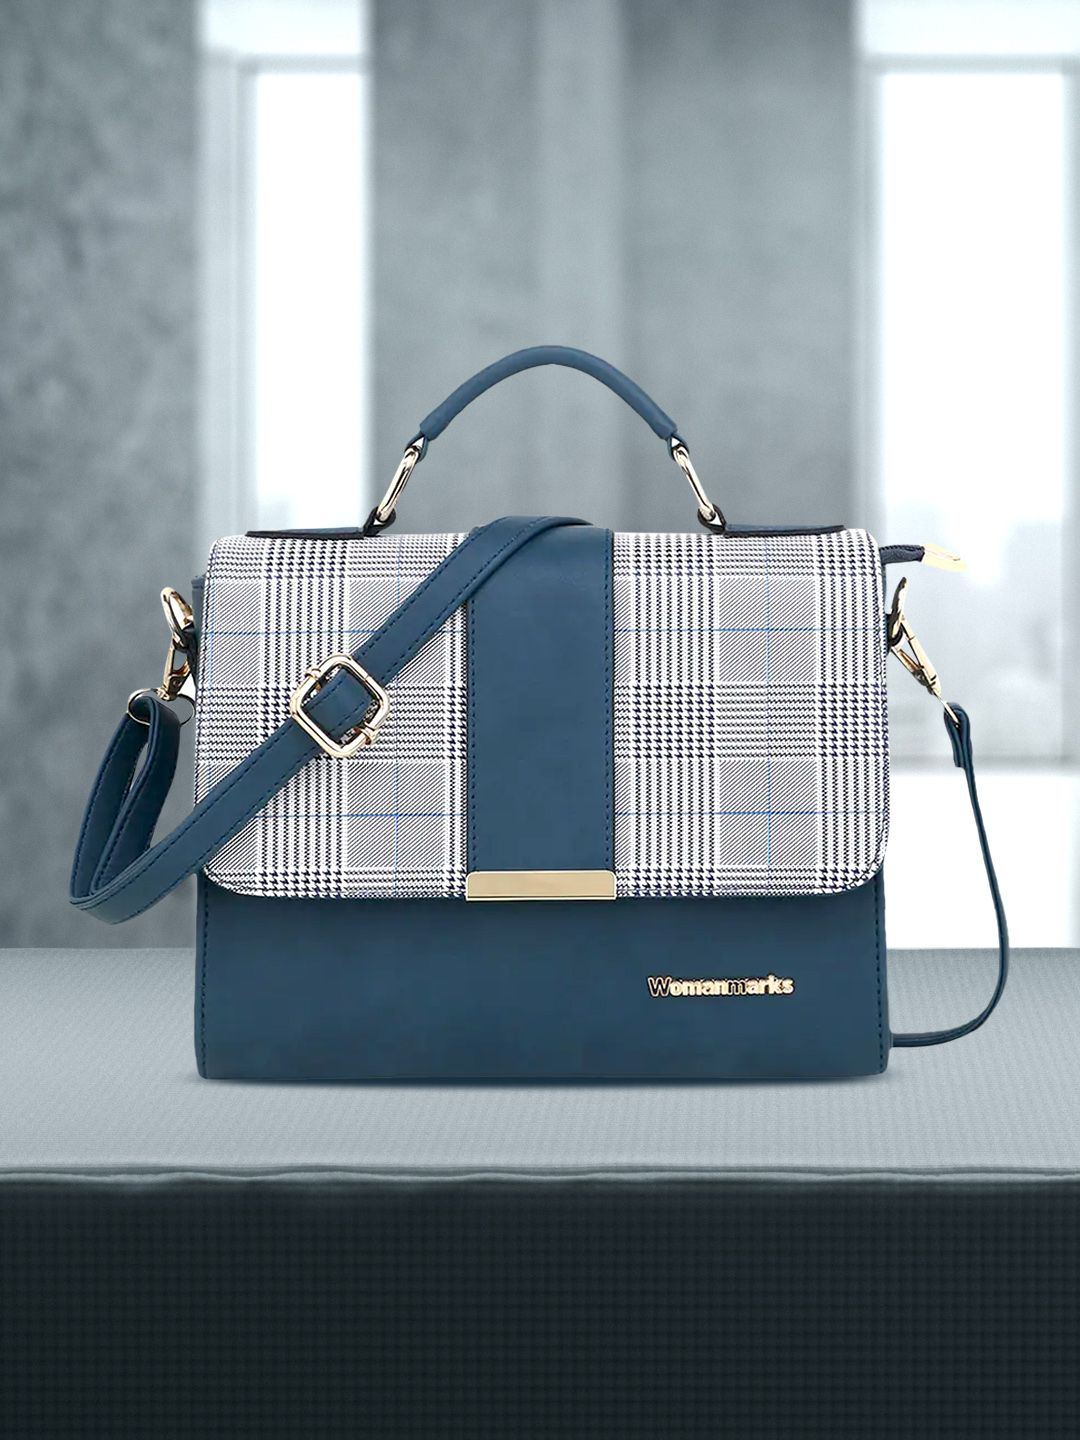 WOMEN MARKS Blue Checked Sling Bag Price in India